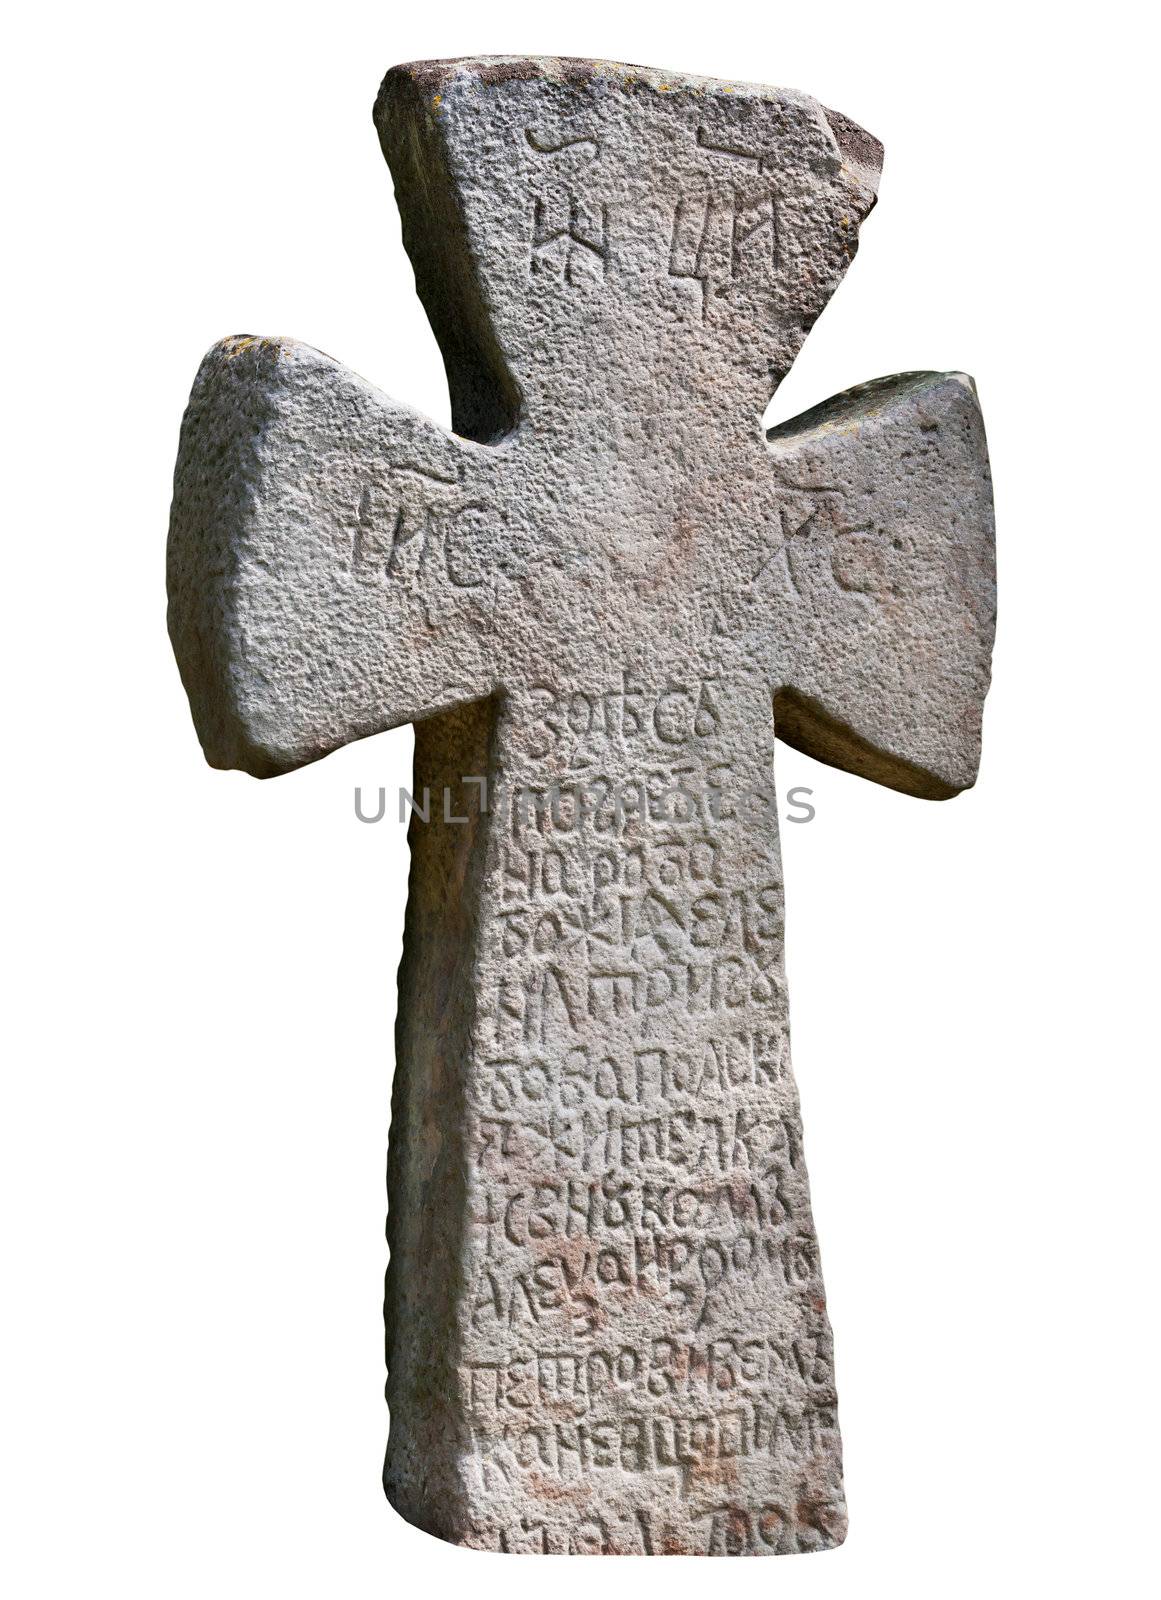 Ancient medieval Slavic stone cross by pzaxe